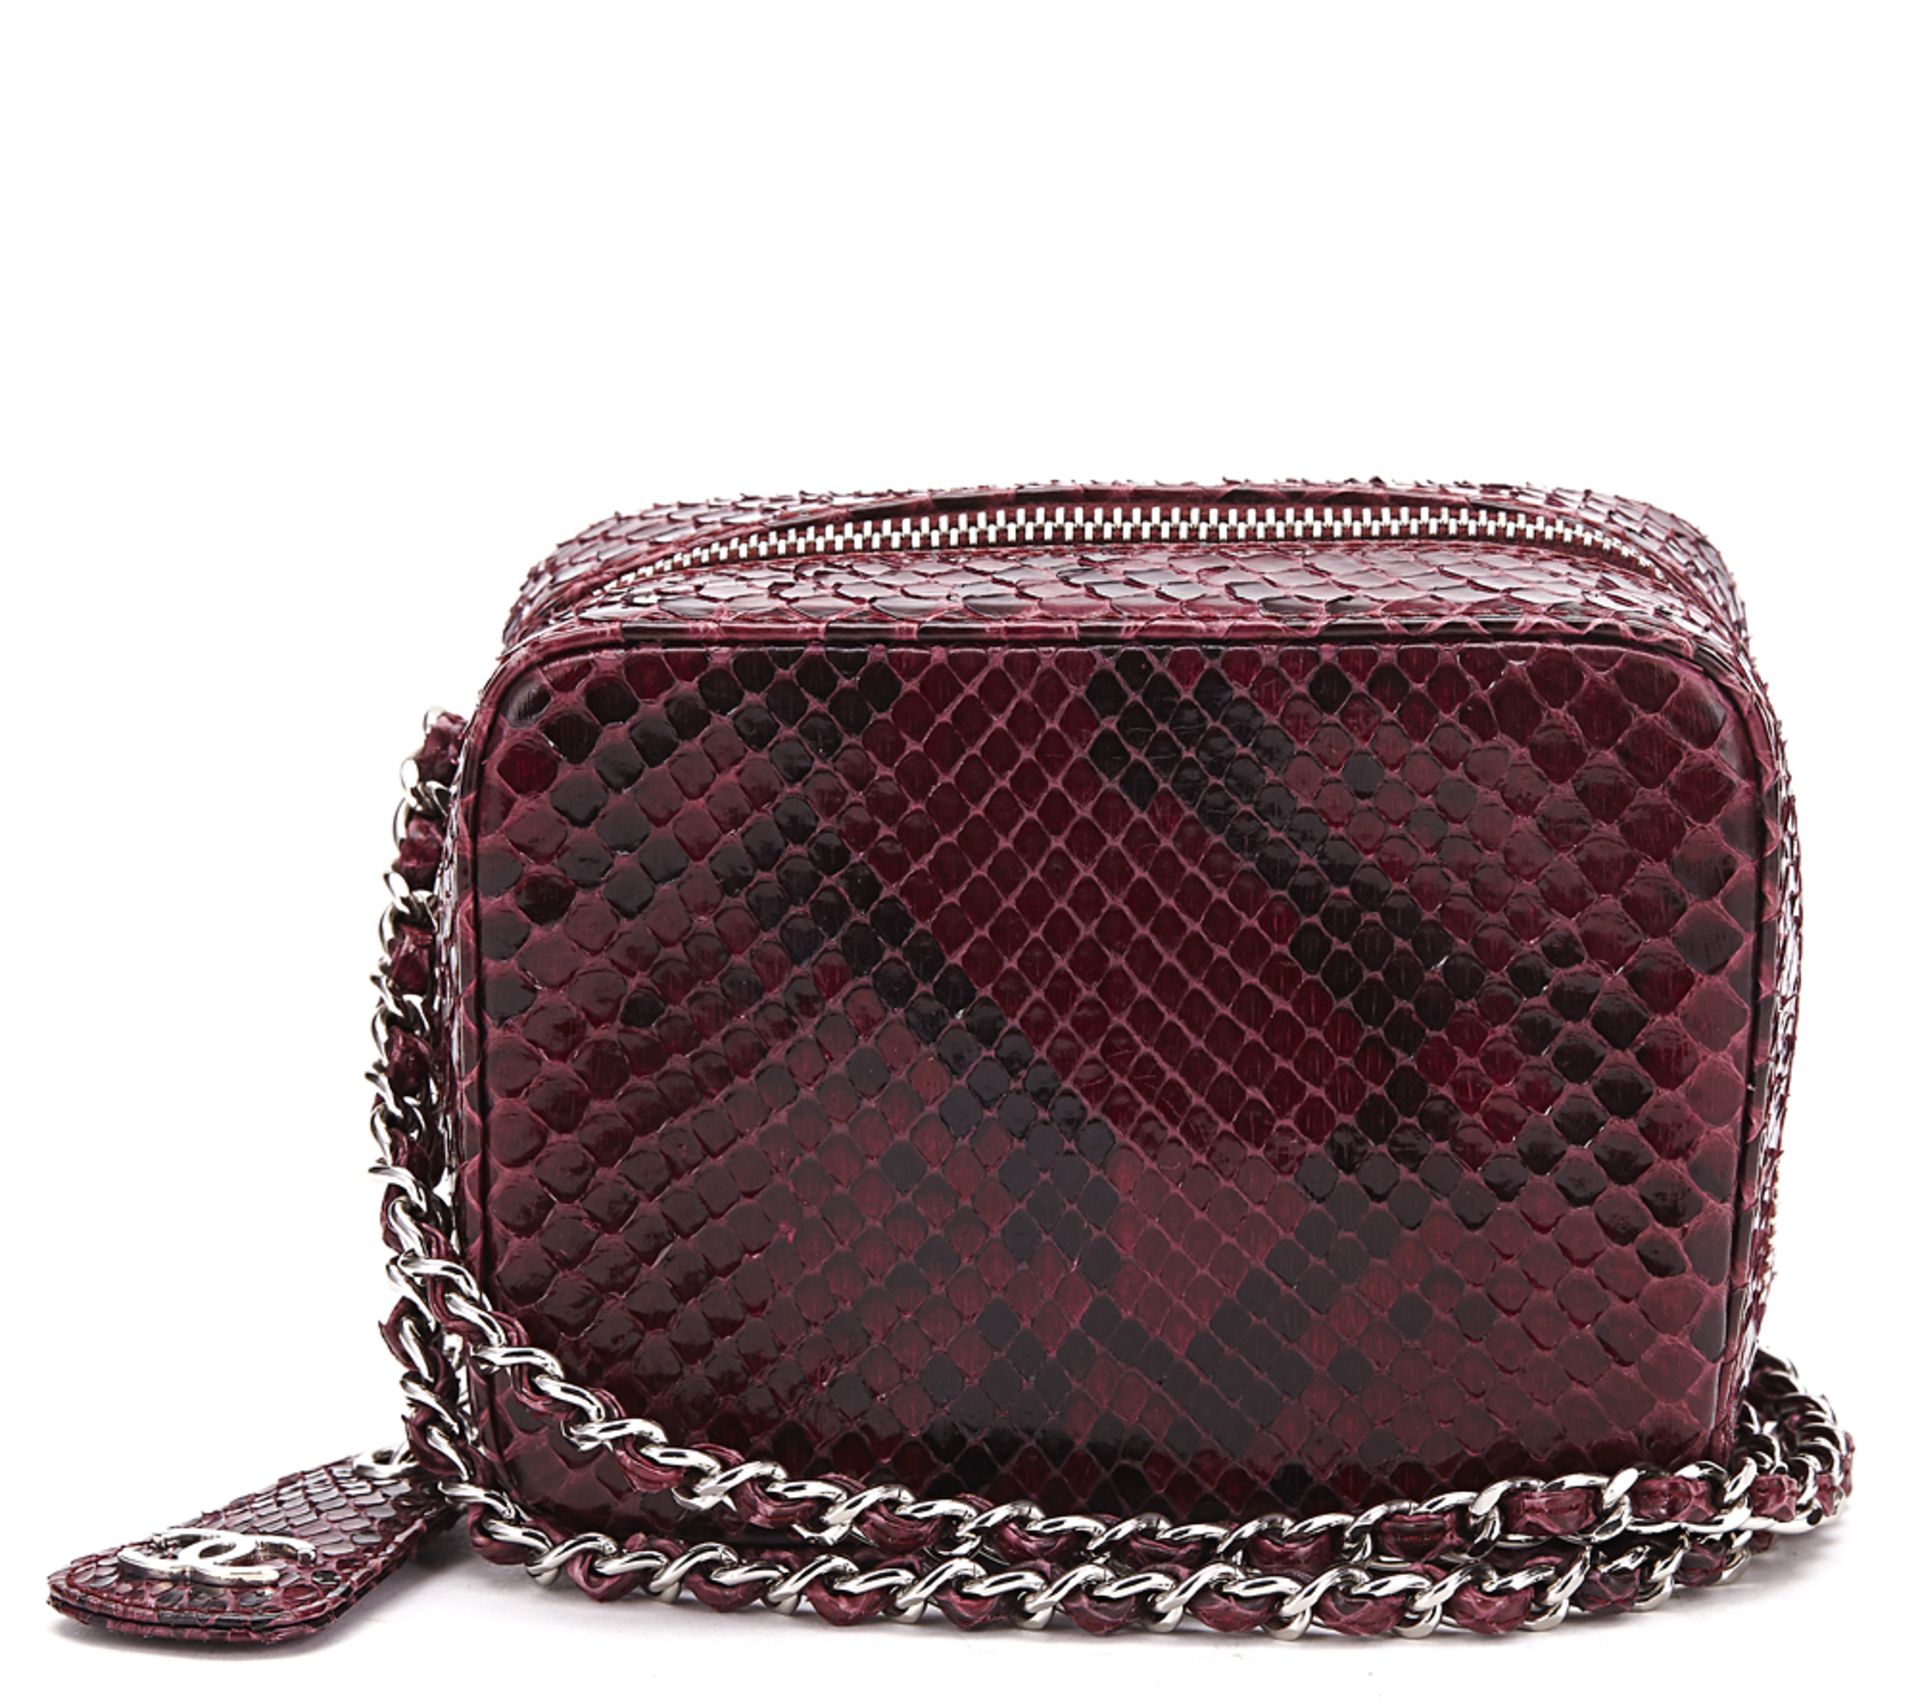 CHANEL Mini Timeless Bag , - Raspberry Python Leather Mini TYPE Clutch   SERIAL NUMBER 6258730